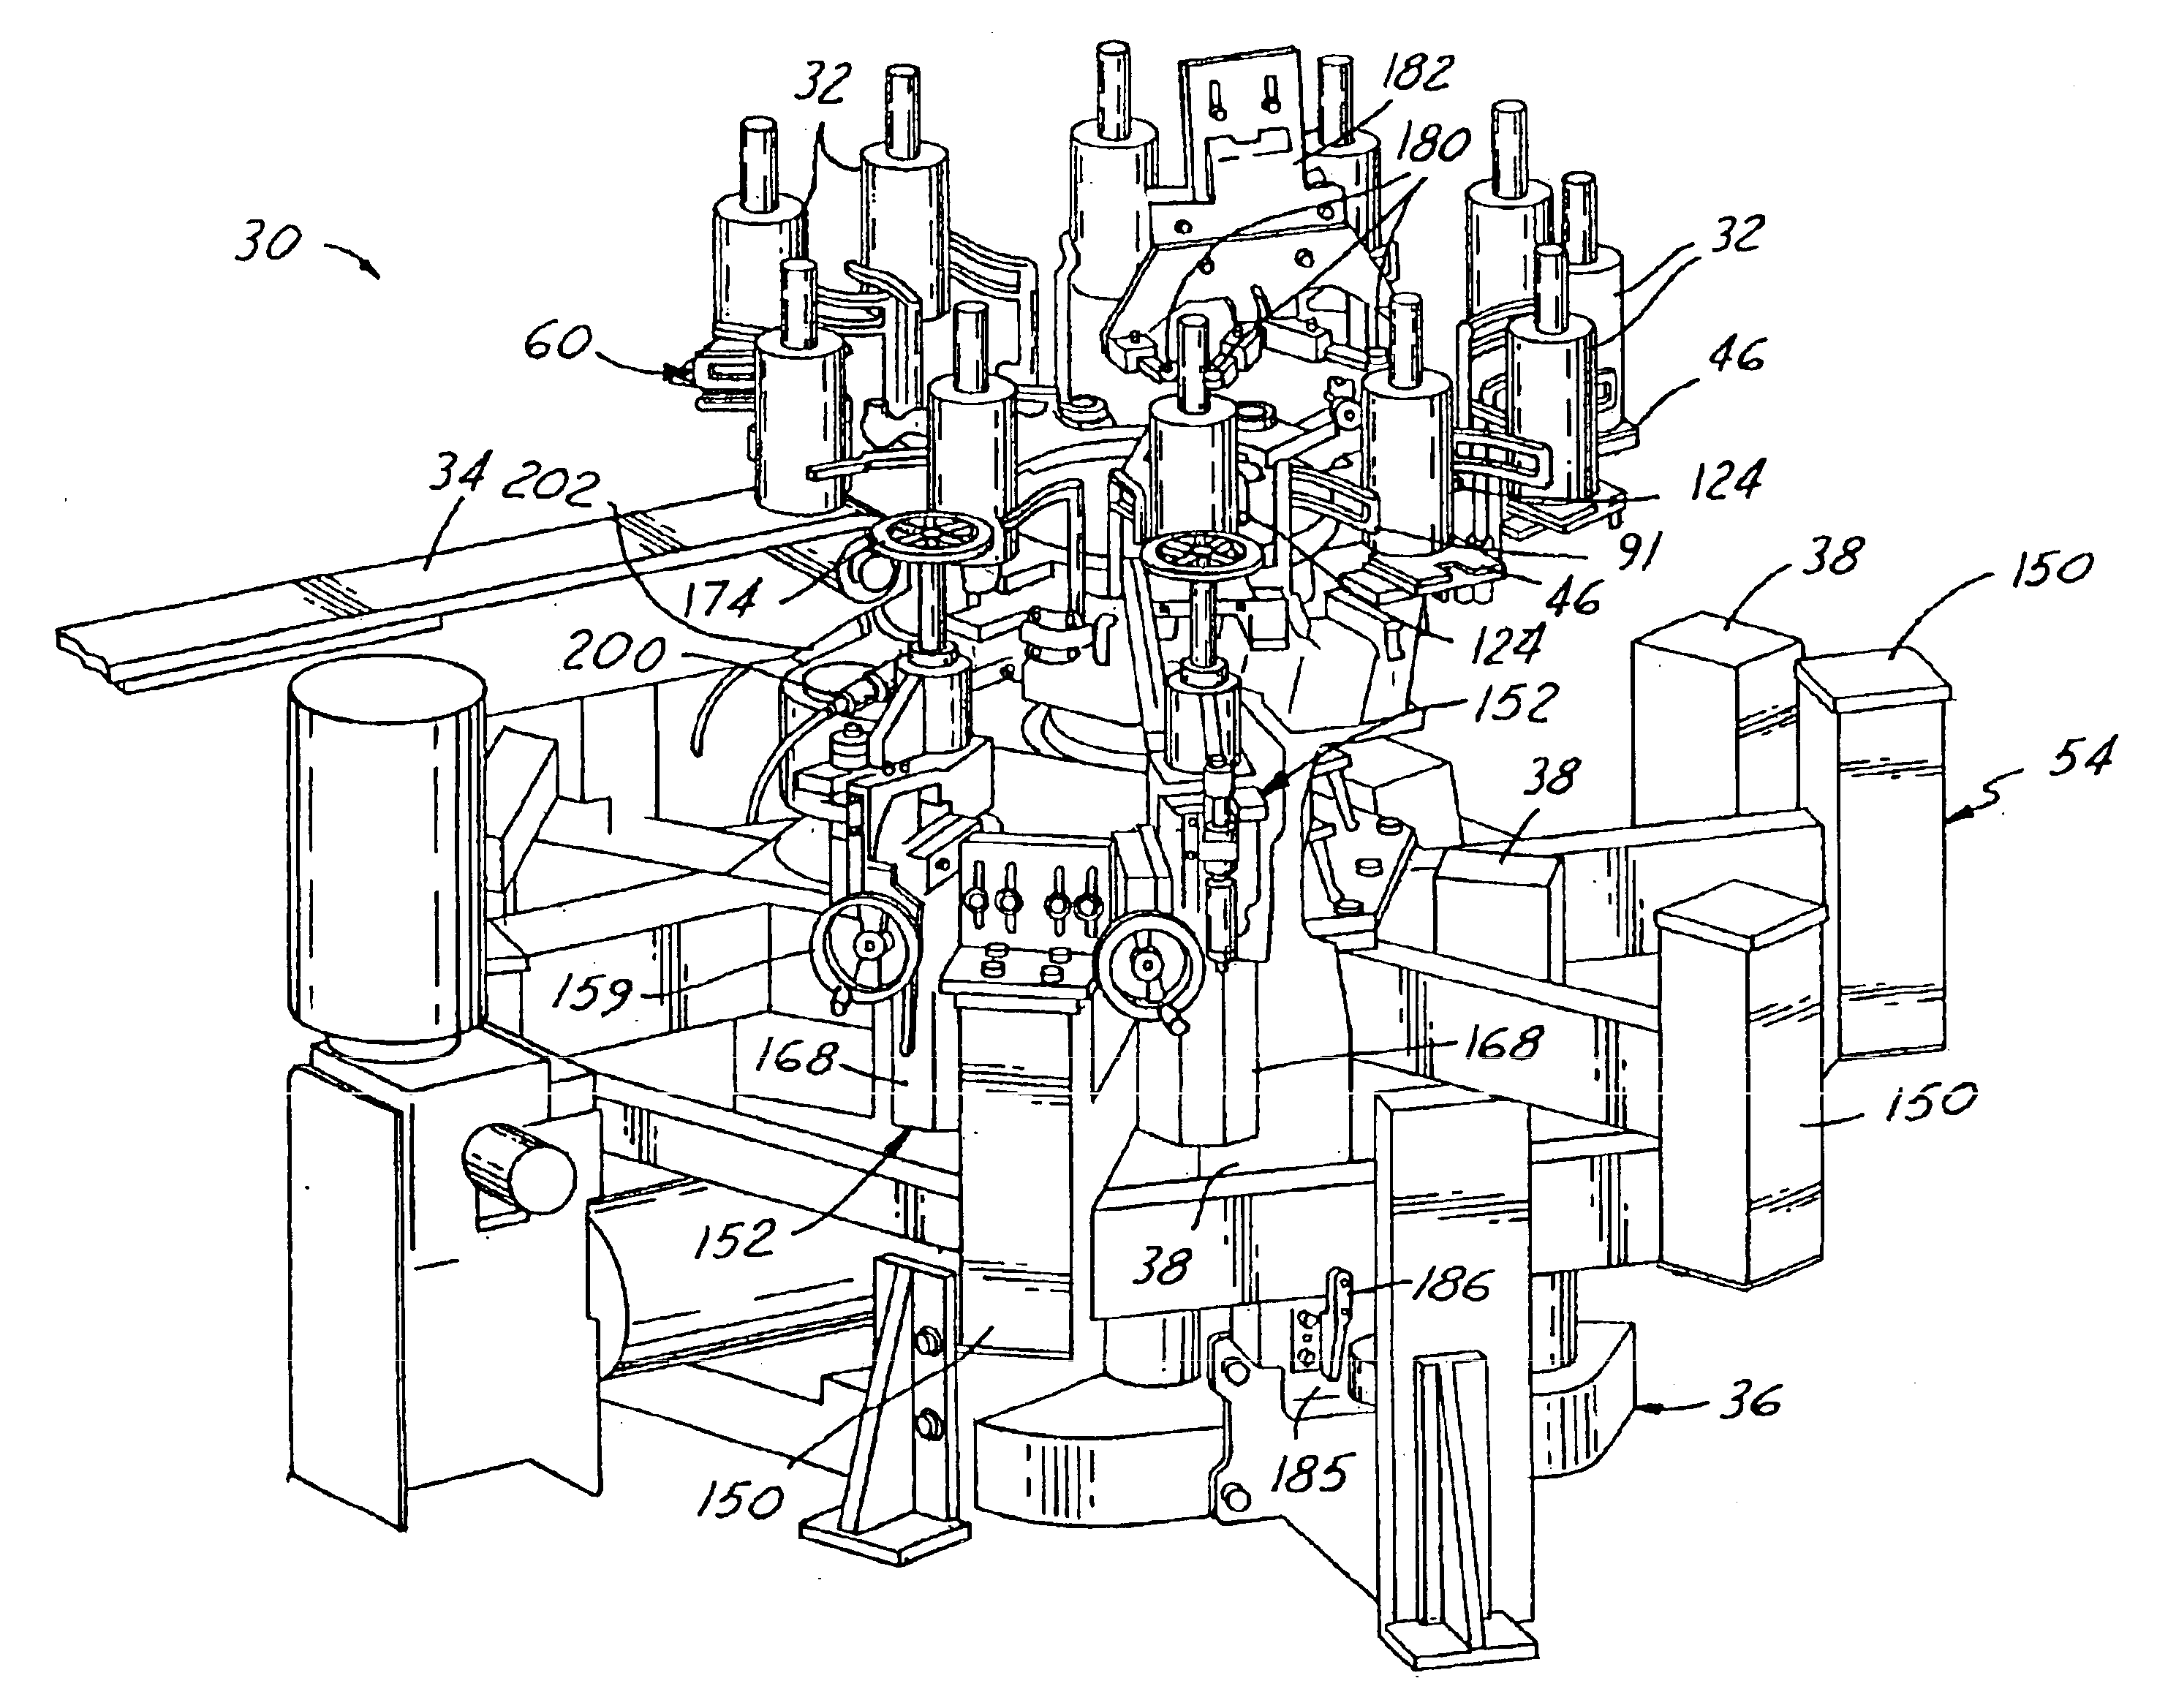 Method and apparatus for inspecting articles of glassware